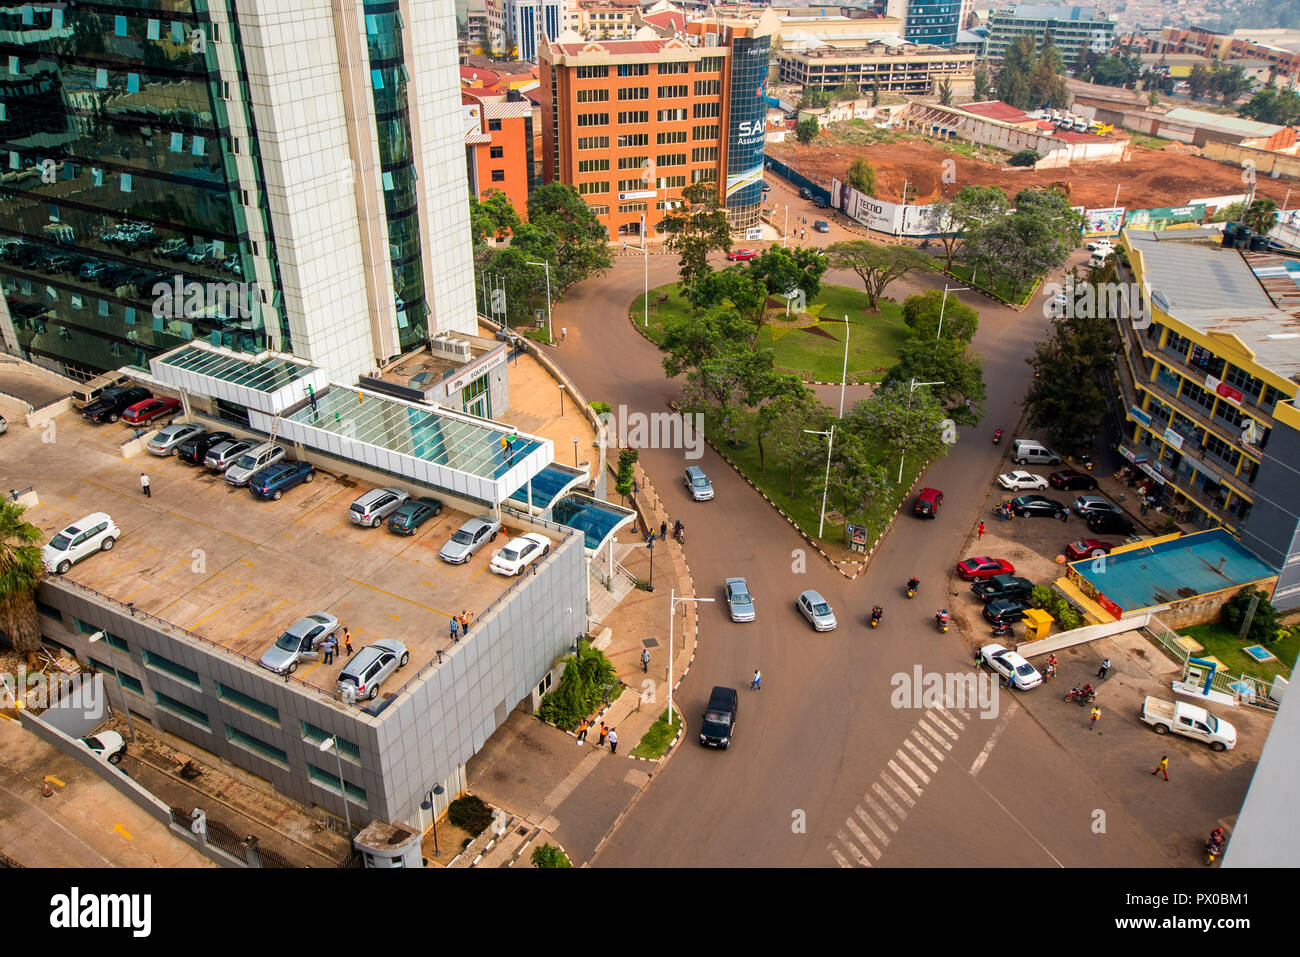 Kigali, Rwanda - September 21, 2018: A view looking down on the street system in the centre of the city Stock Photo